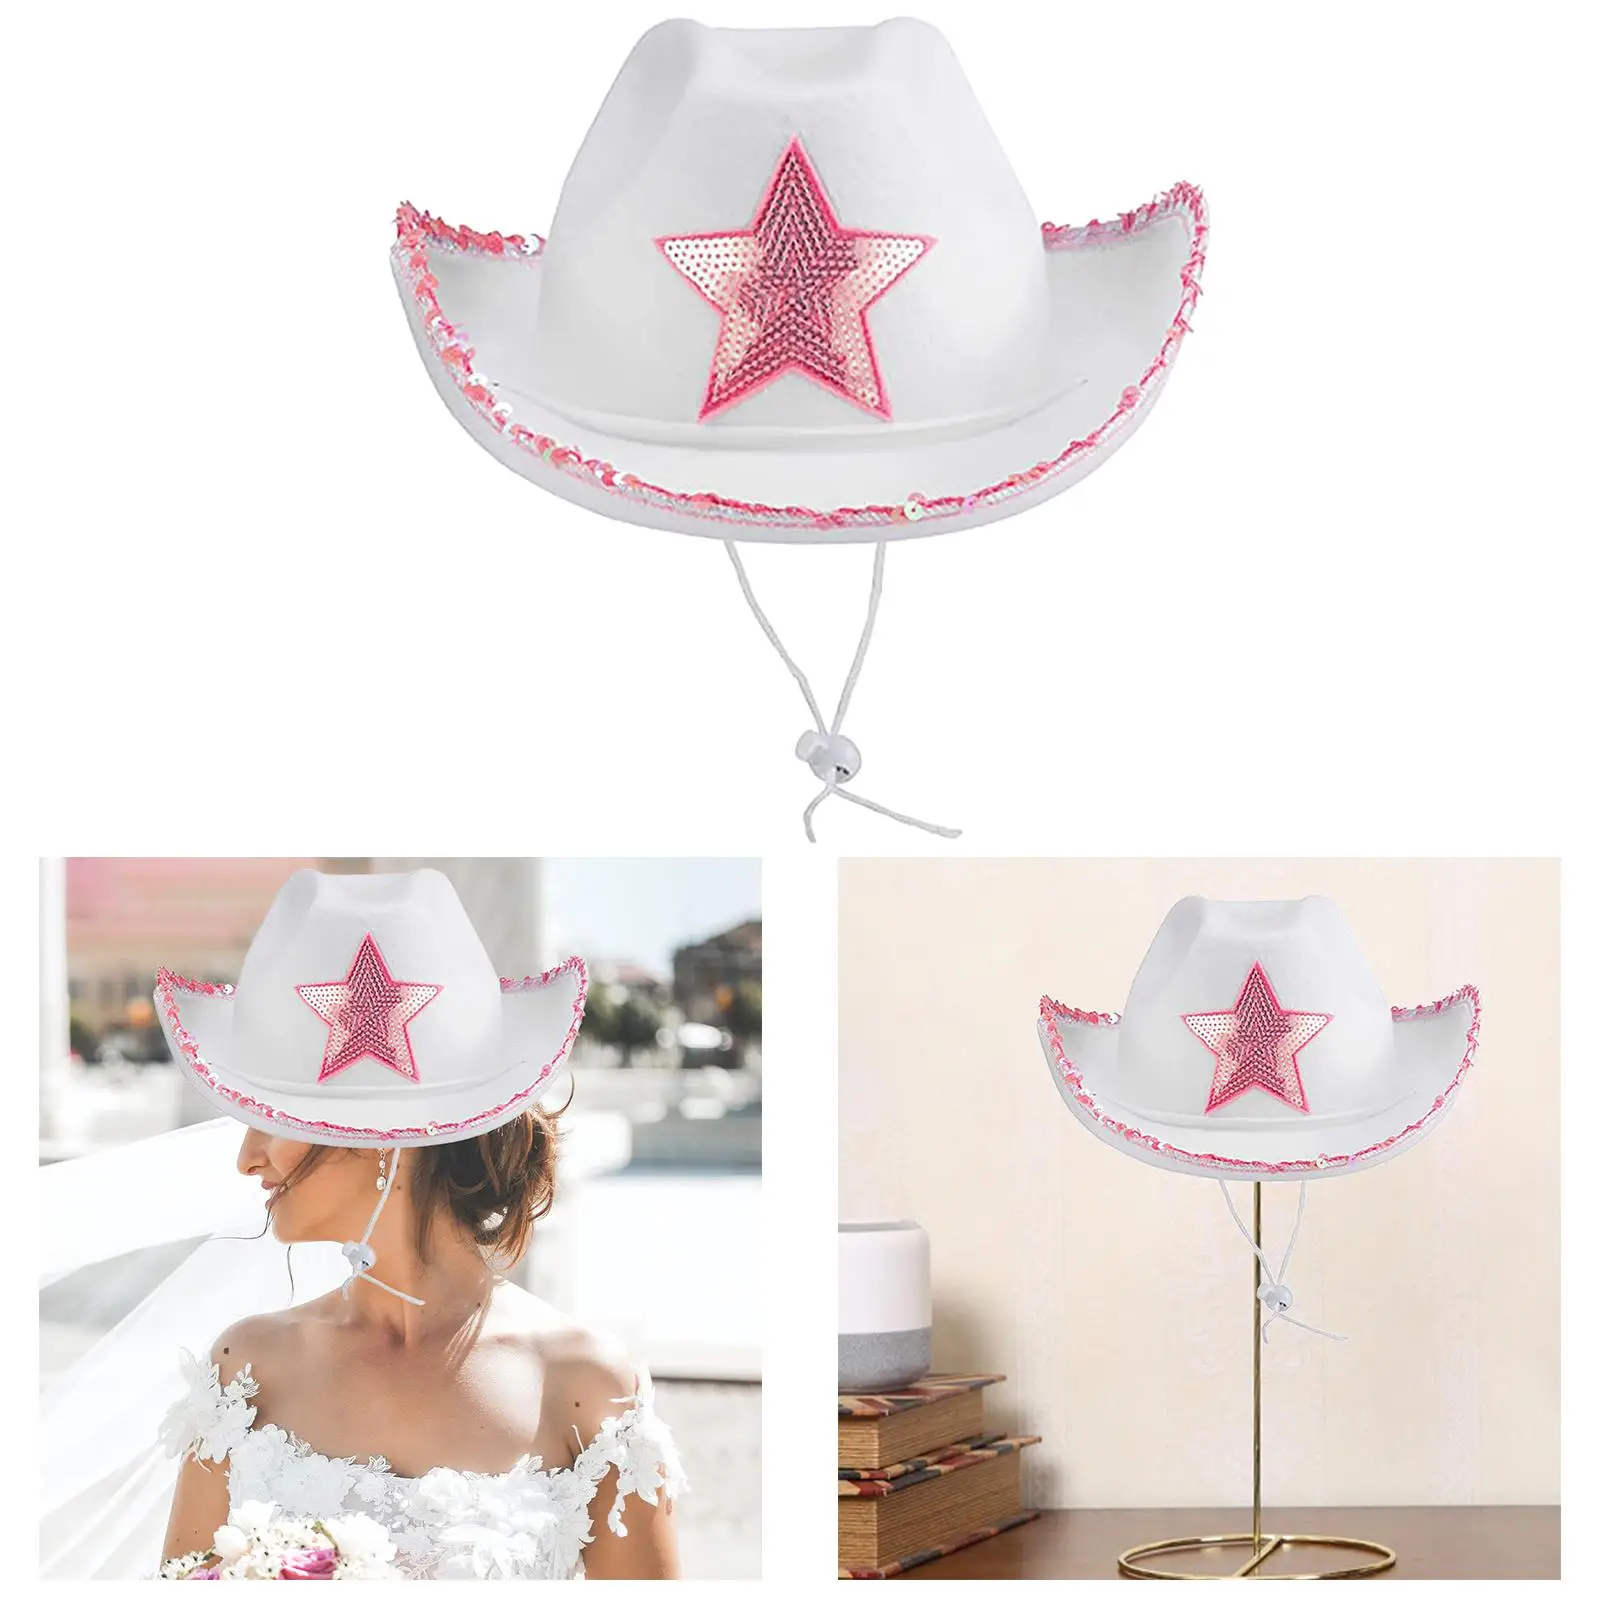 Novelty  Hat with Tiara Adjustable Neck Draw String White Felt Western Cowboy Hat for Women Ladies Dress up Fancy Dress Party